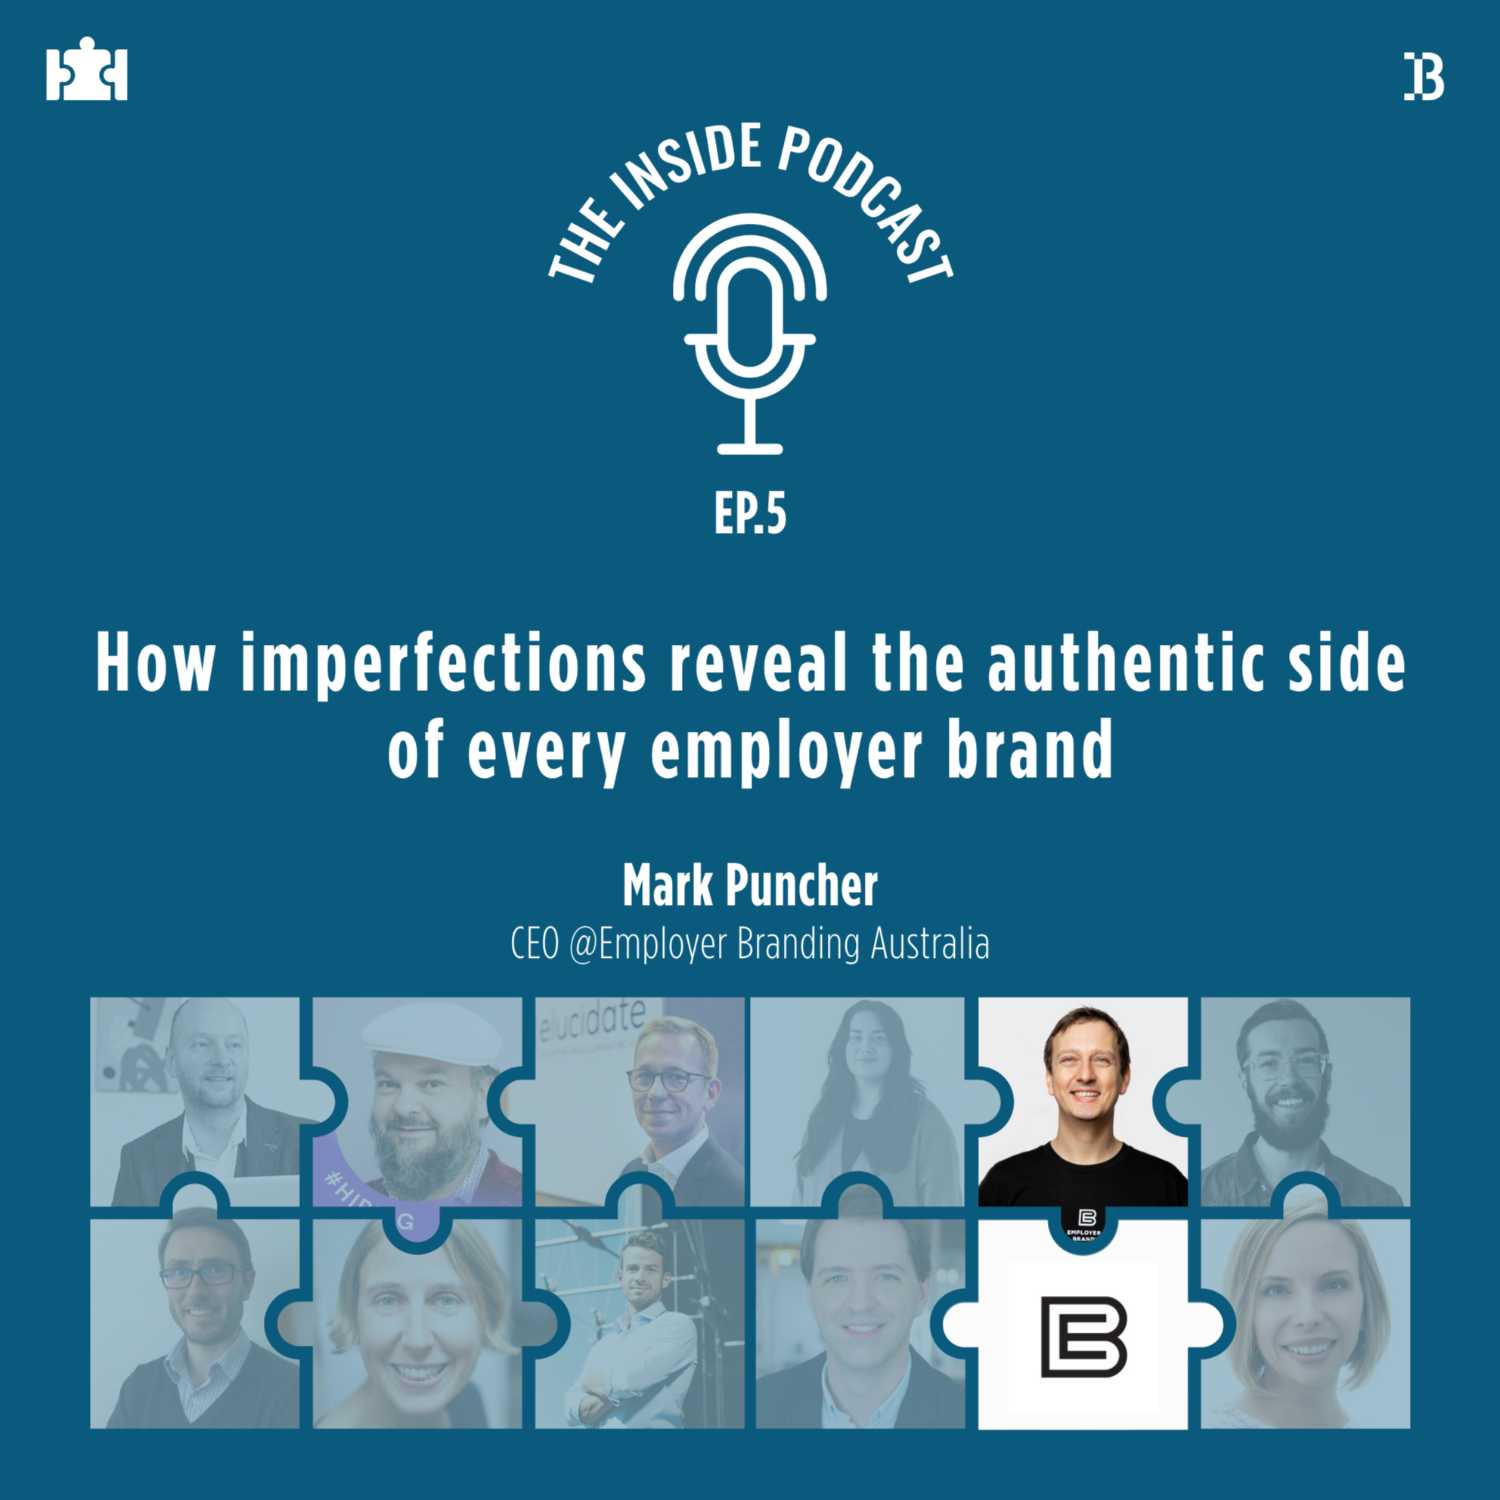 Employer Branding T.I.P S06Ep.5 | “How imperfections reveal the authentic side of every employer brand”, with Mark Puncher, CEO at @Employer Branding Australia